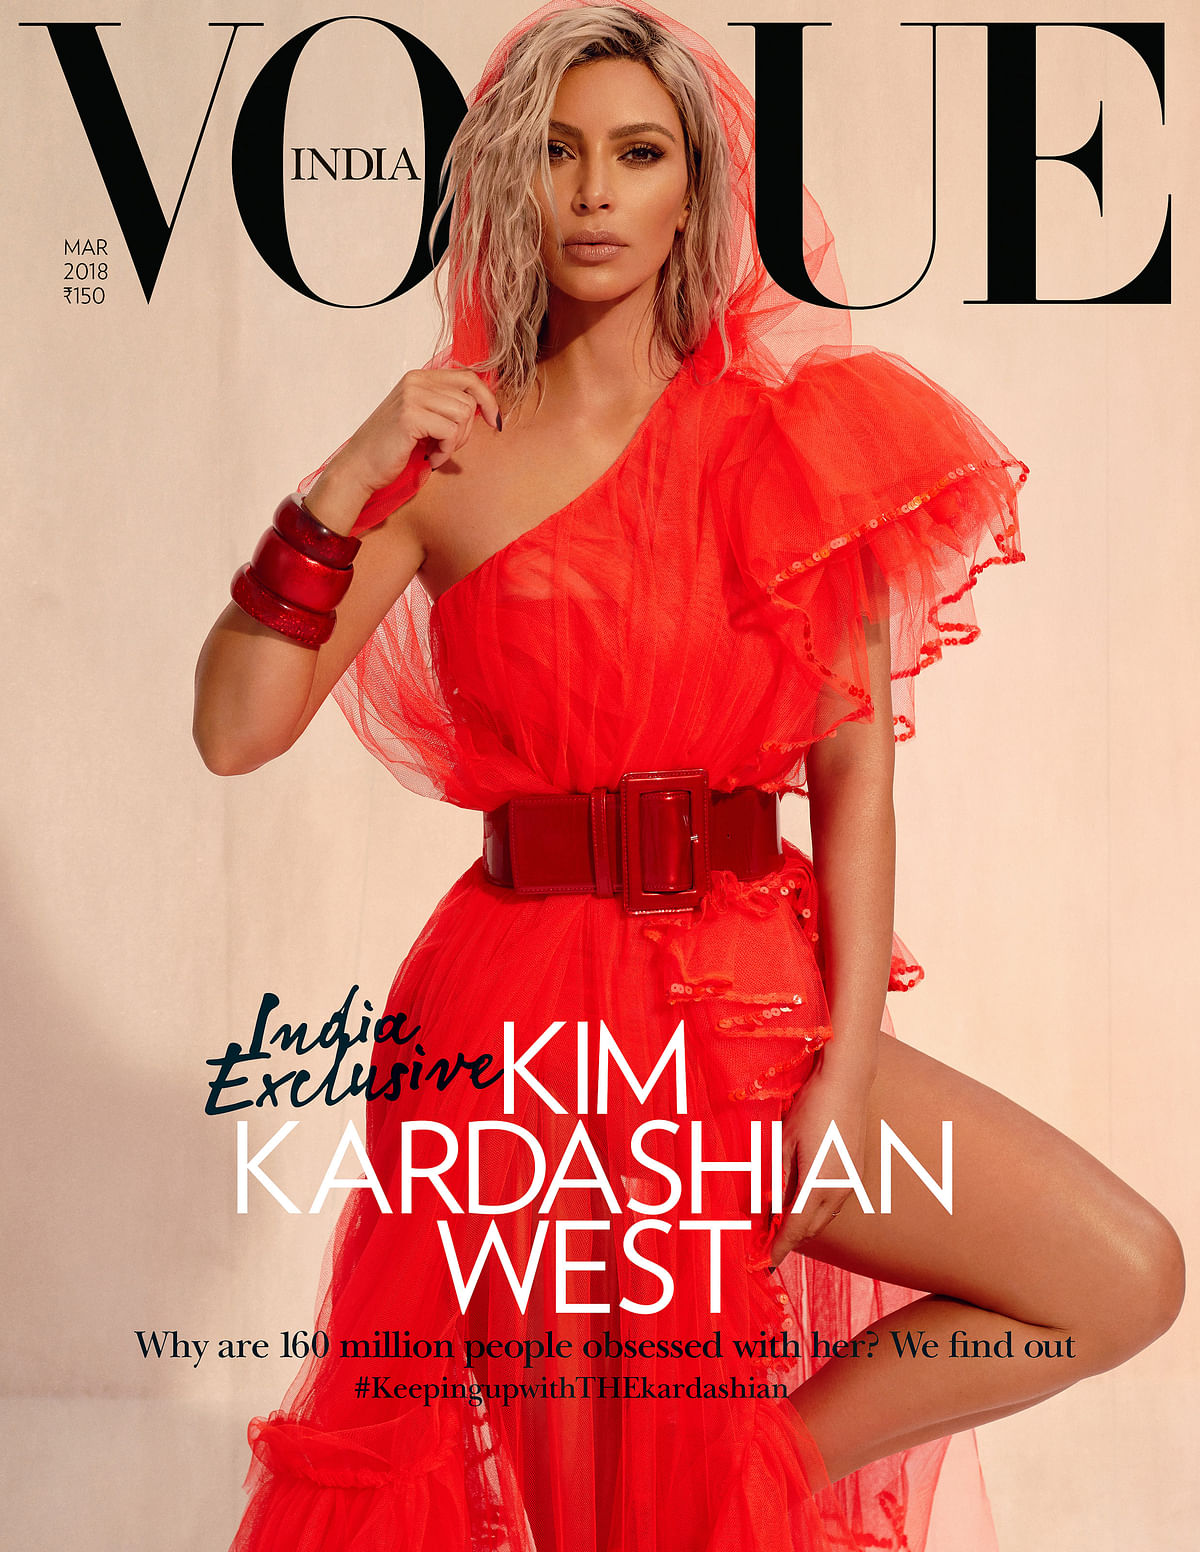 Kim K is on Vogue India’s March 2018 cover. And some people seem to have a BIG problem with it!